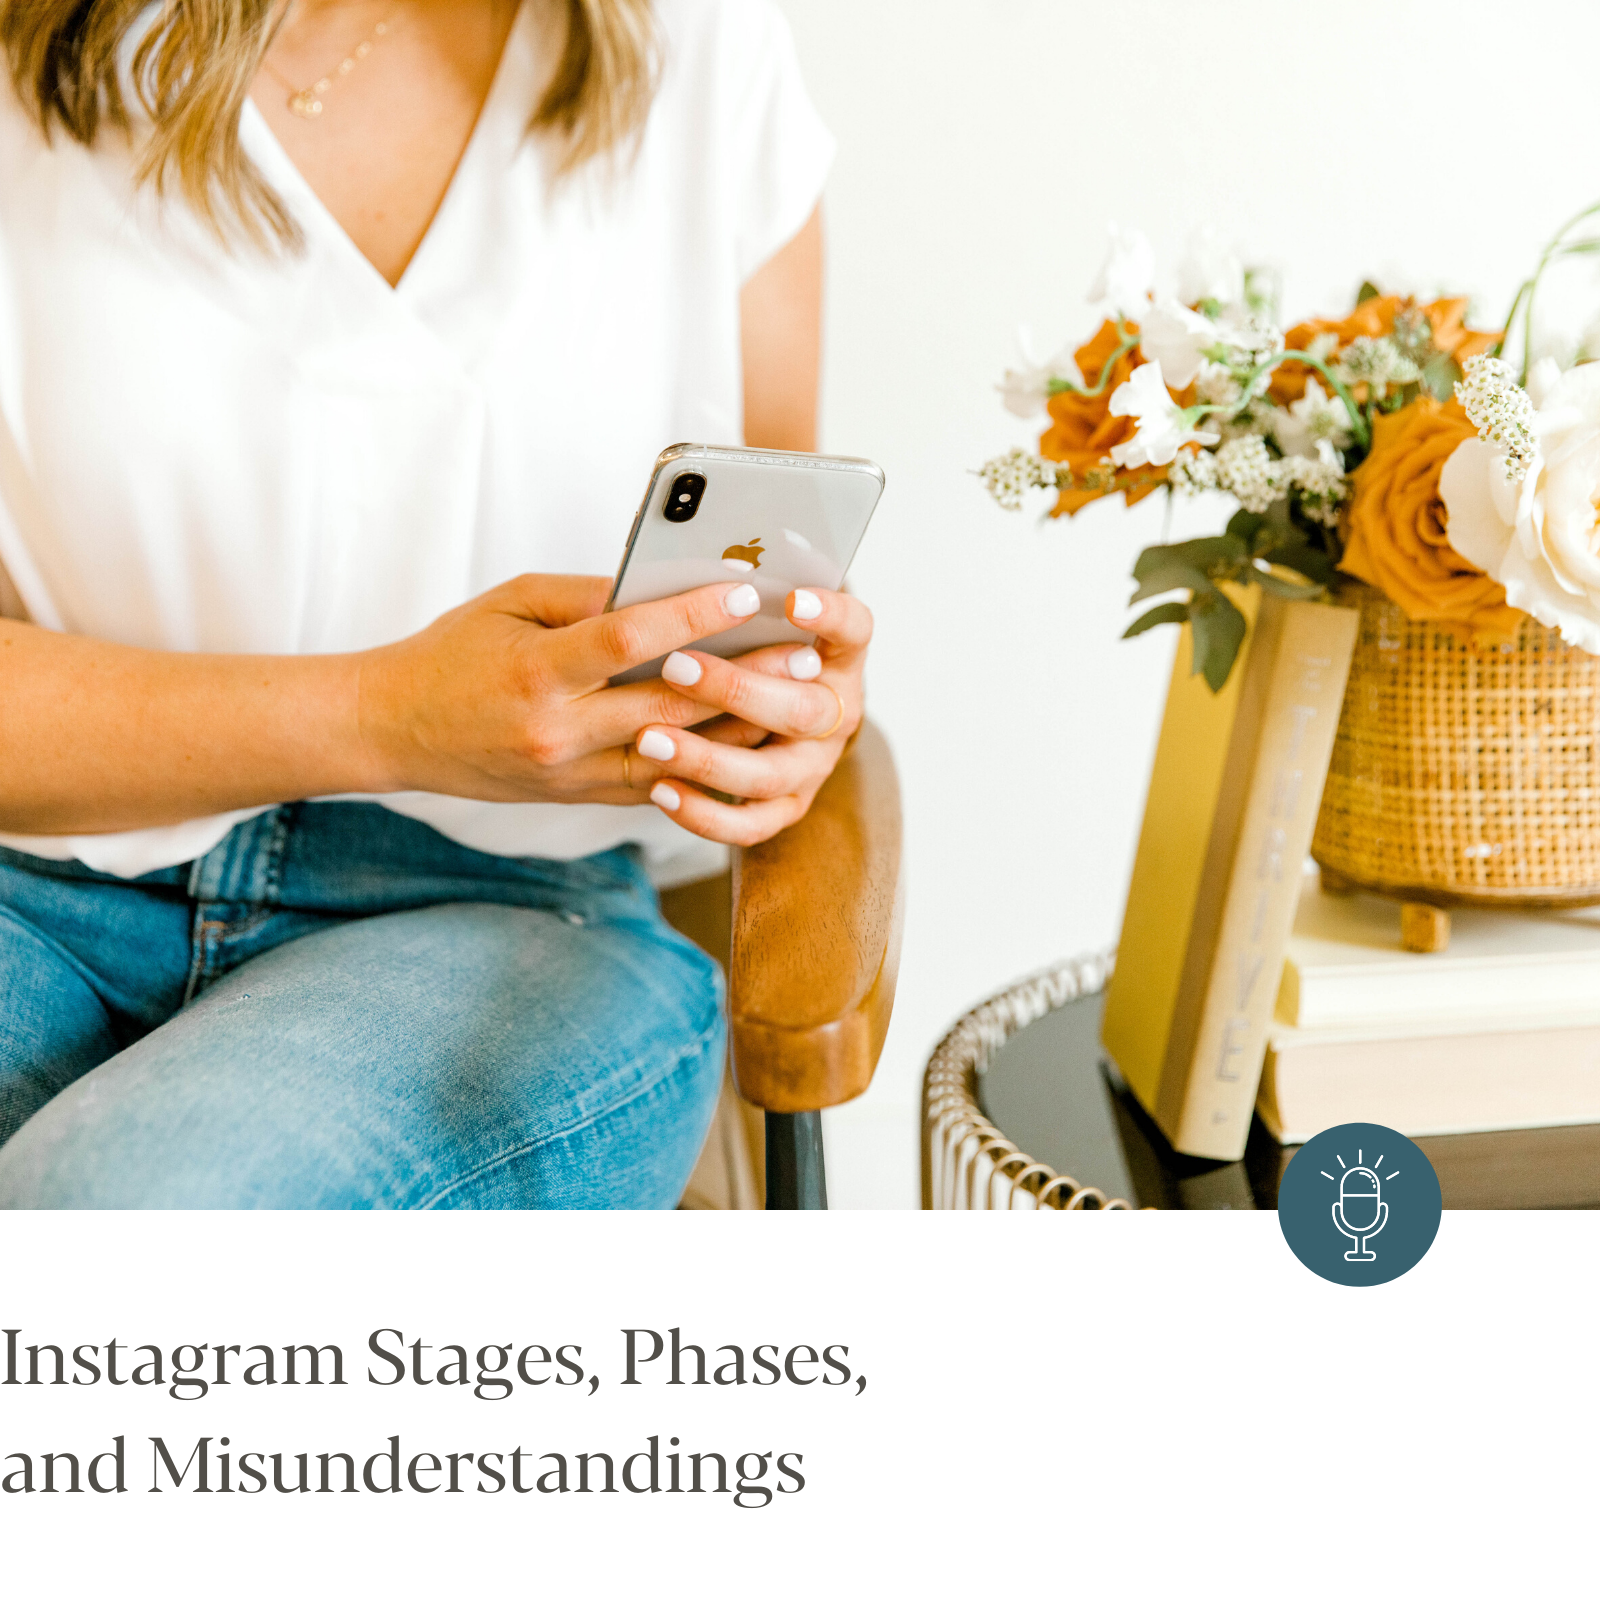 Episode #228 - Instagram Stages, Phases, and Misunderstandings